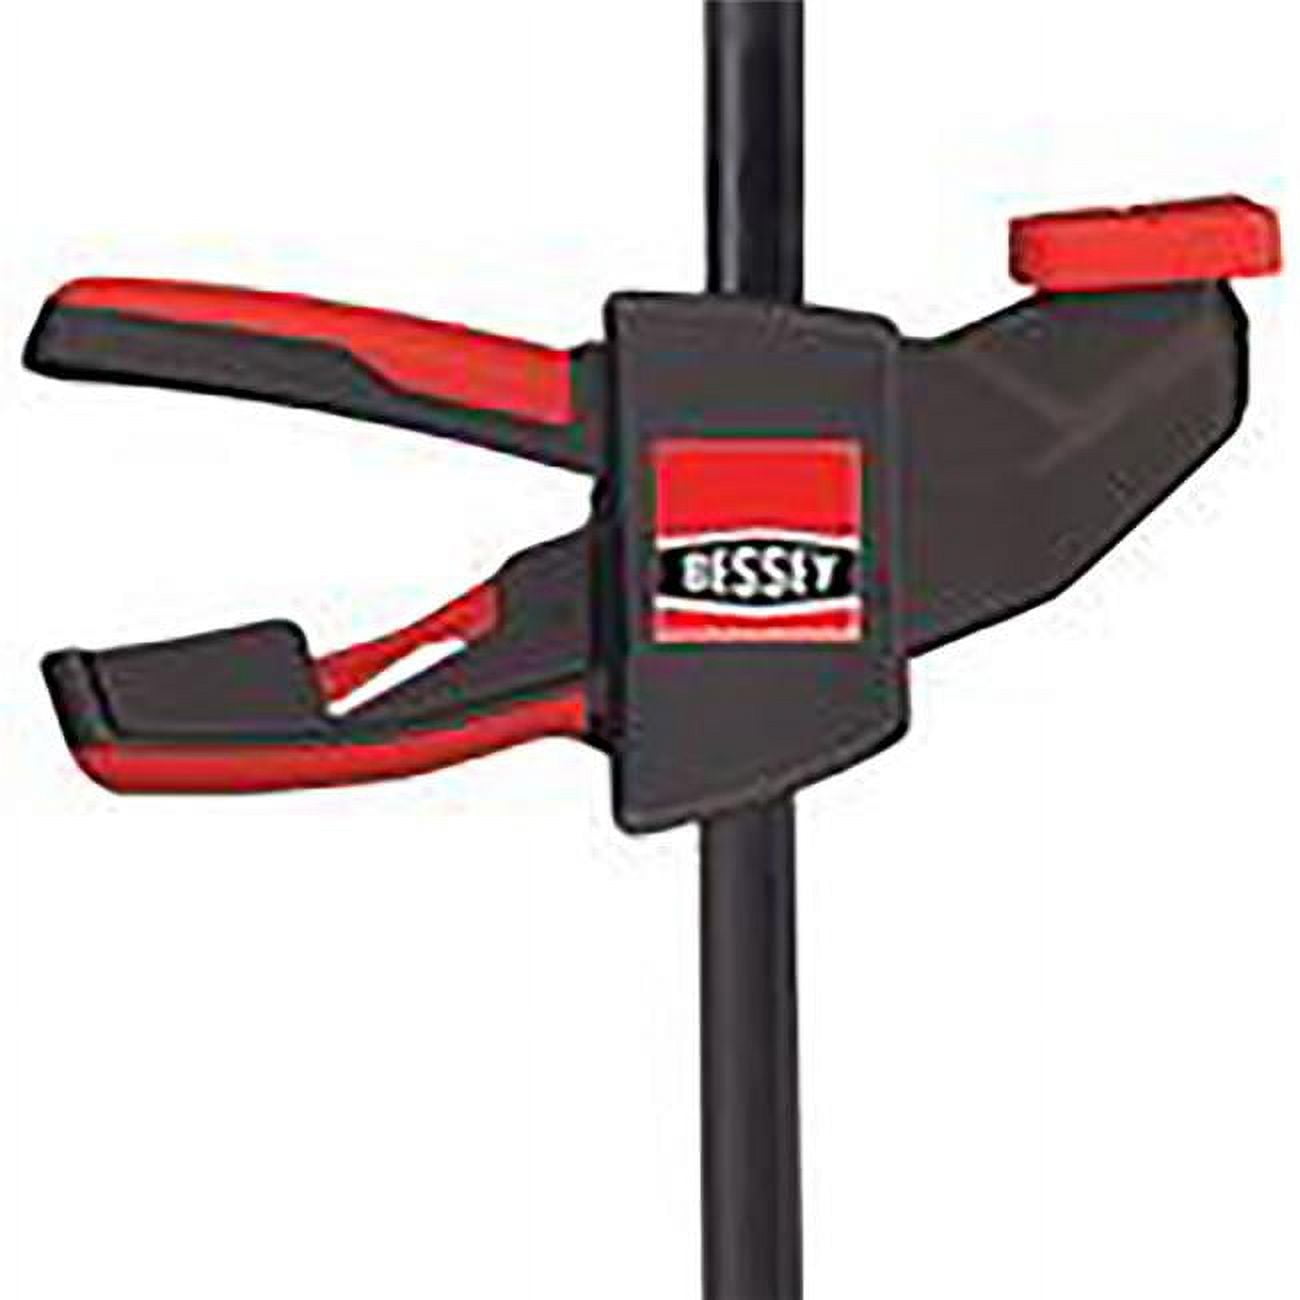 Picture of Bessey 2007084 12 x 3.125 in. 300 lbs EHK Trigger Clamp